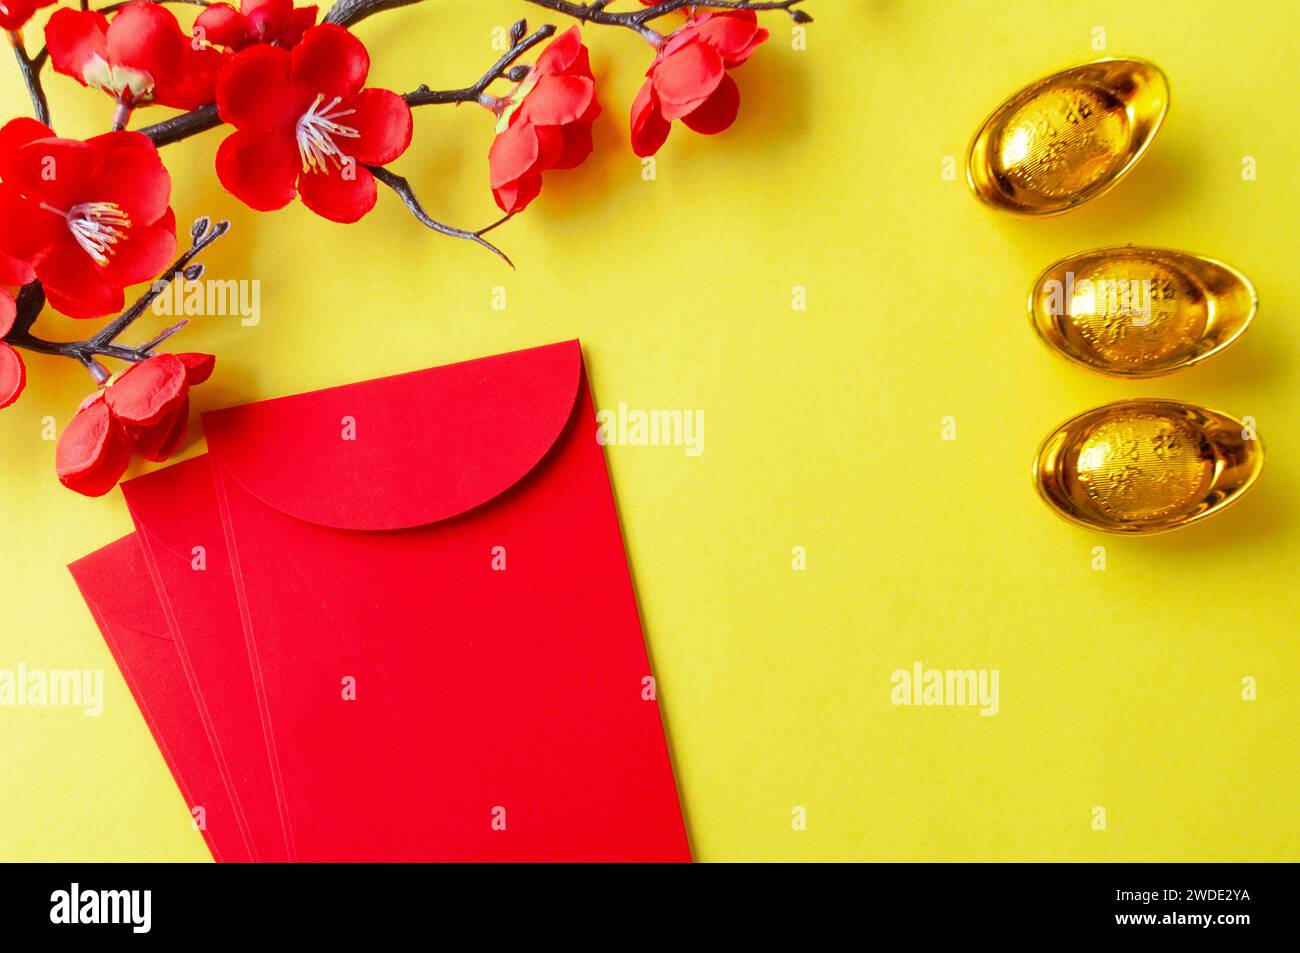 Top view of Chinese New Year red packet, cherry blossom and golden ingots decoration with customizable space for text or wishes. Stock Photo